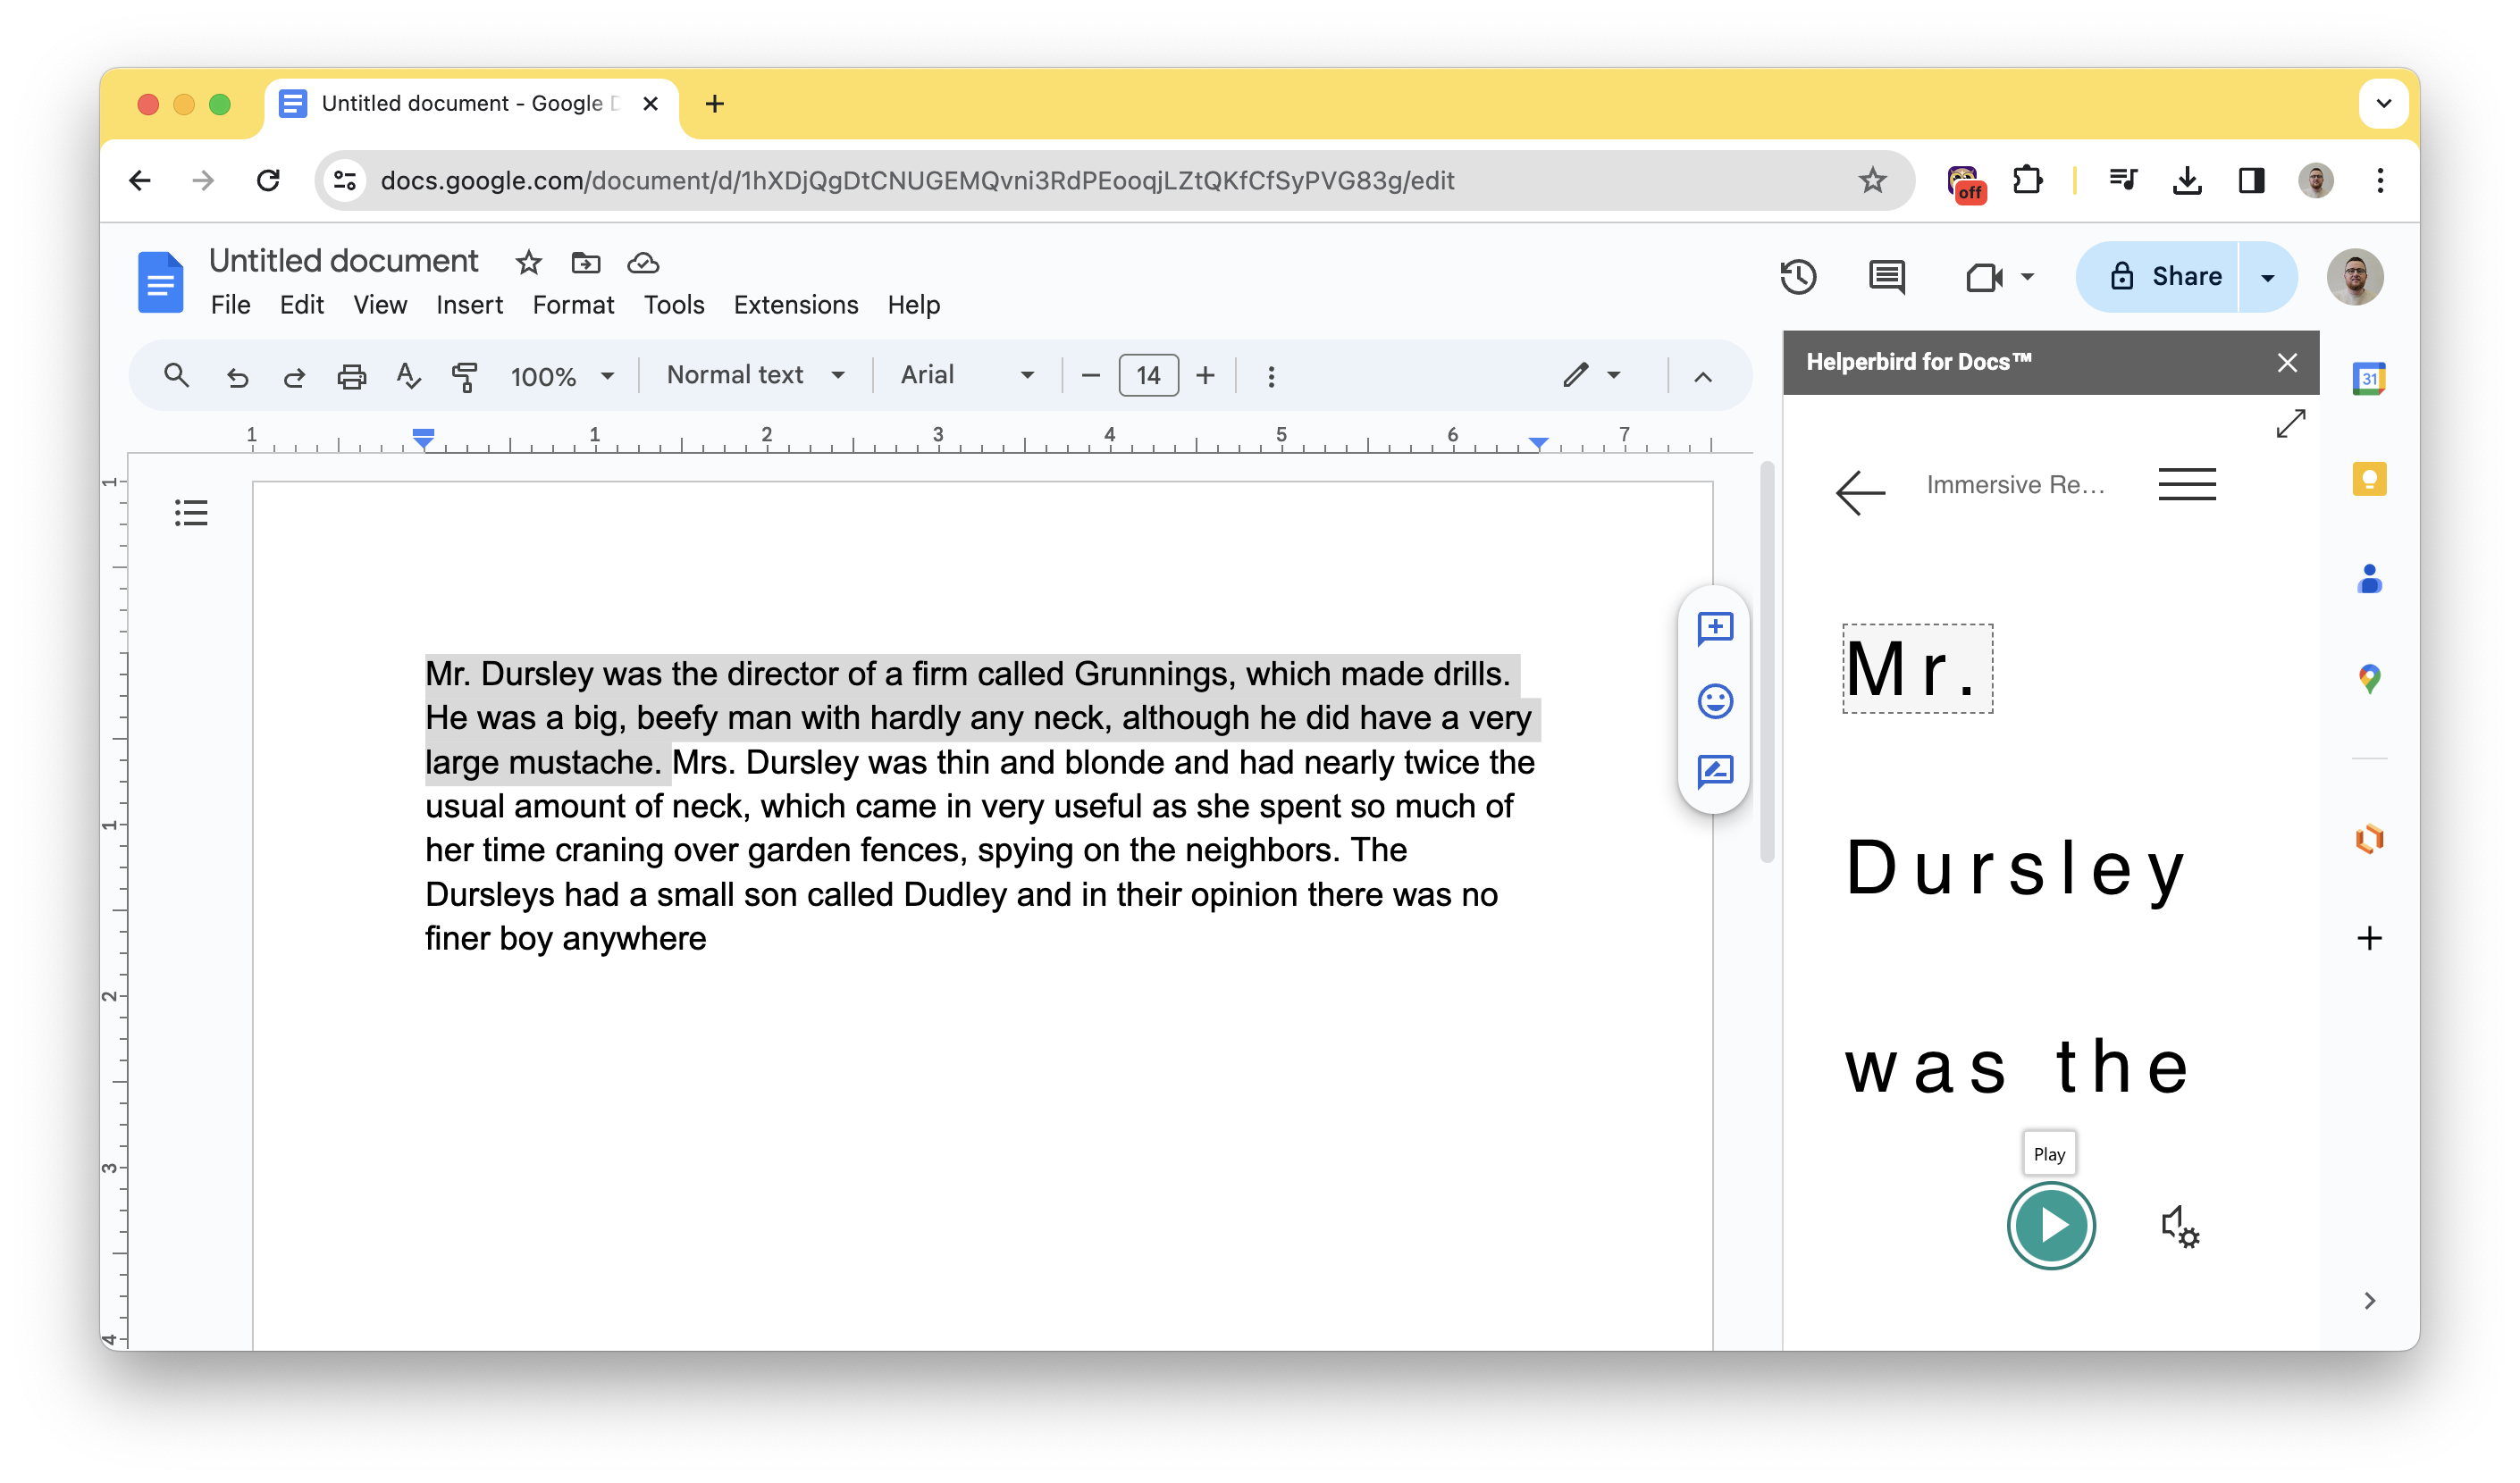 Screenshot of the Helperbird add-on's 'Immersive Reader' feature activated within Google Docs. The document text 'Mr. Dursley' is magnified in a separate overlay to the right, with each word enlarged and individually highlighted. Below the magnified text, there's a 'Play' button indicating the start of the text-to-speech function. The Helperbird sidebar is visible, showing the 'Immersive Reader' header and the text magnification feature in use.